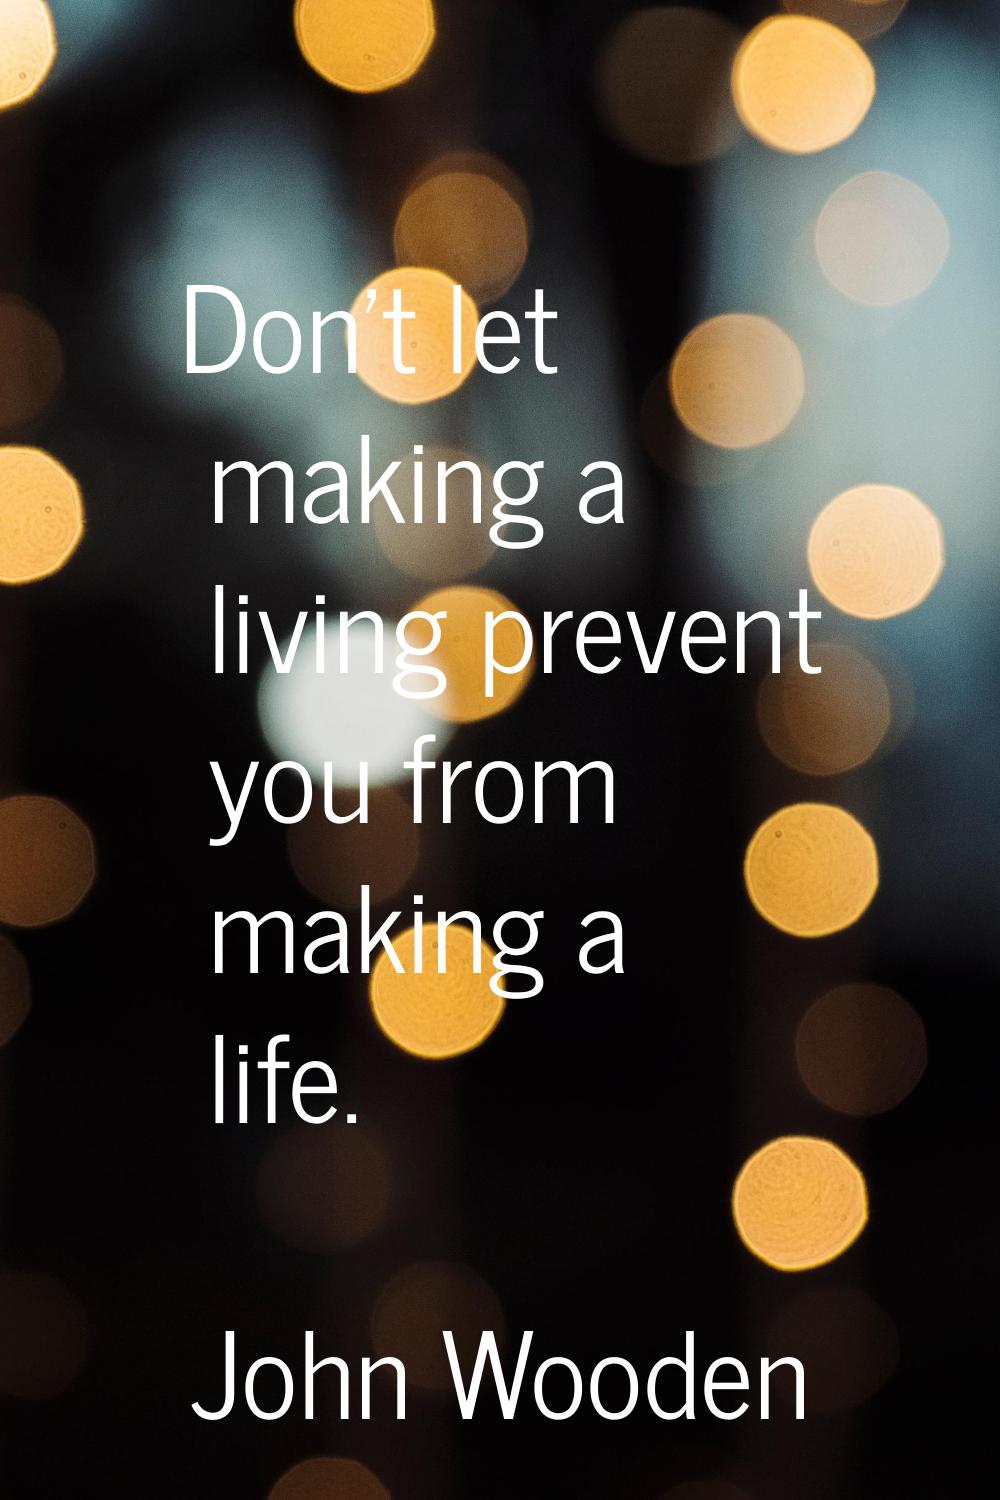 Don't let making a living prevent you from making a life.